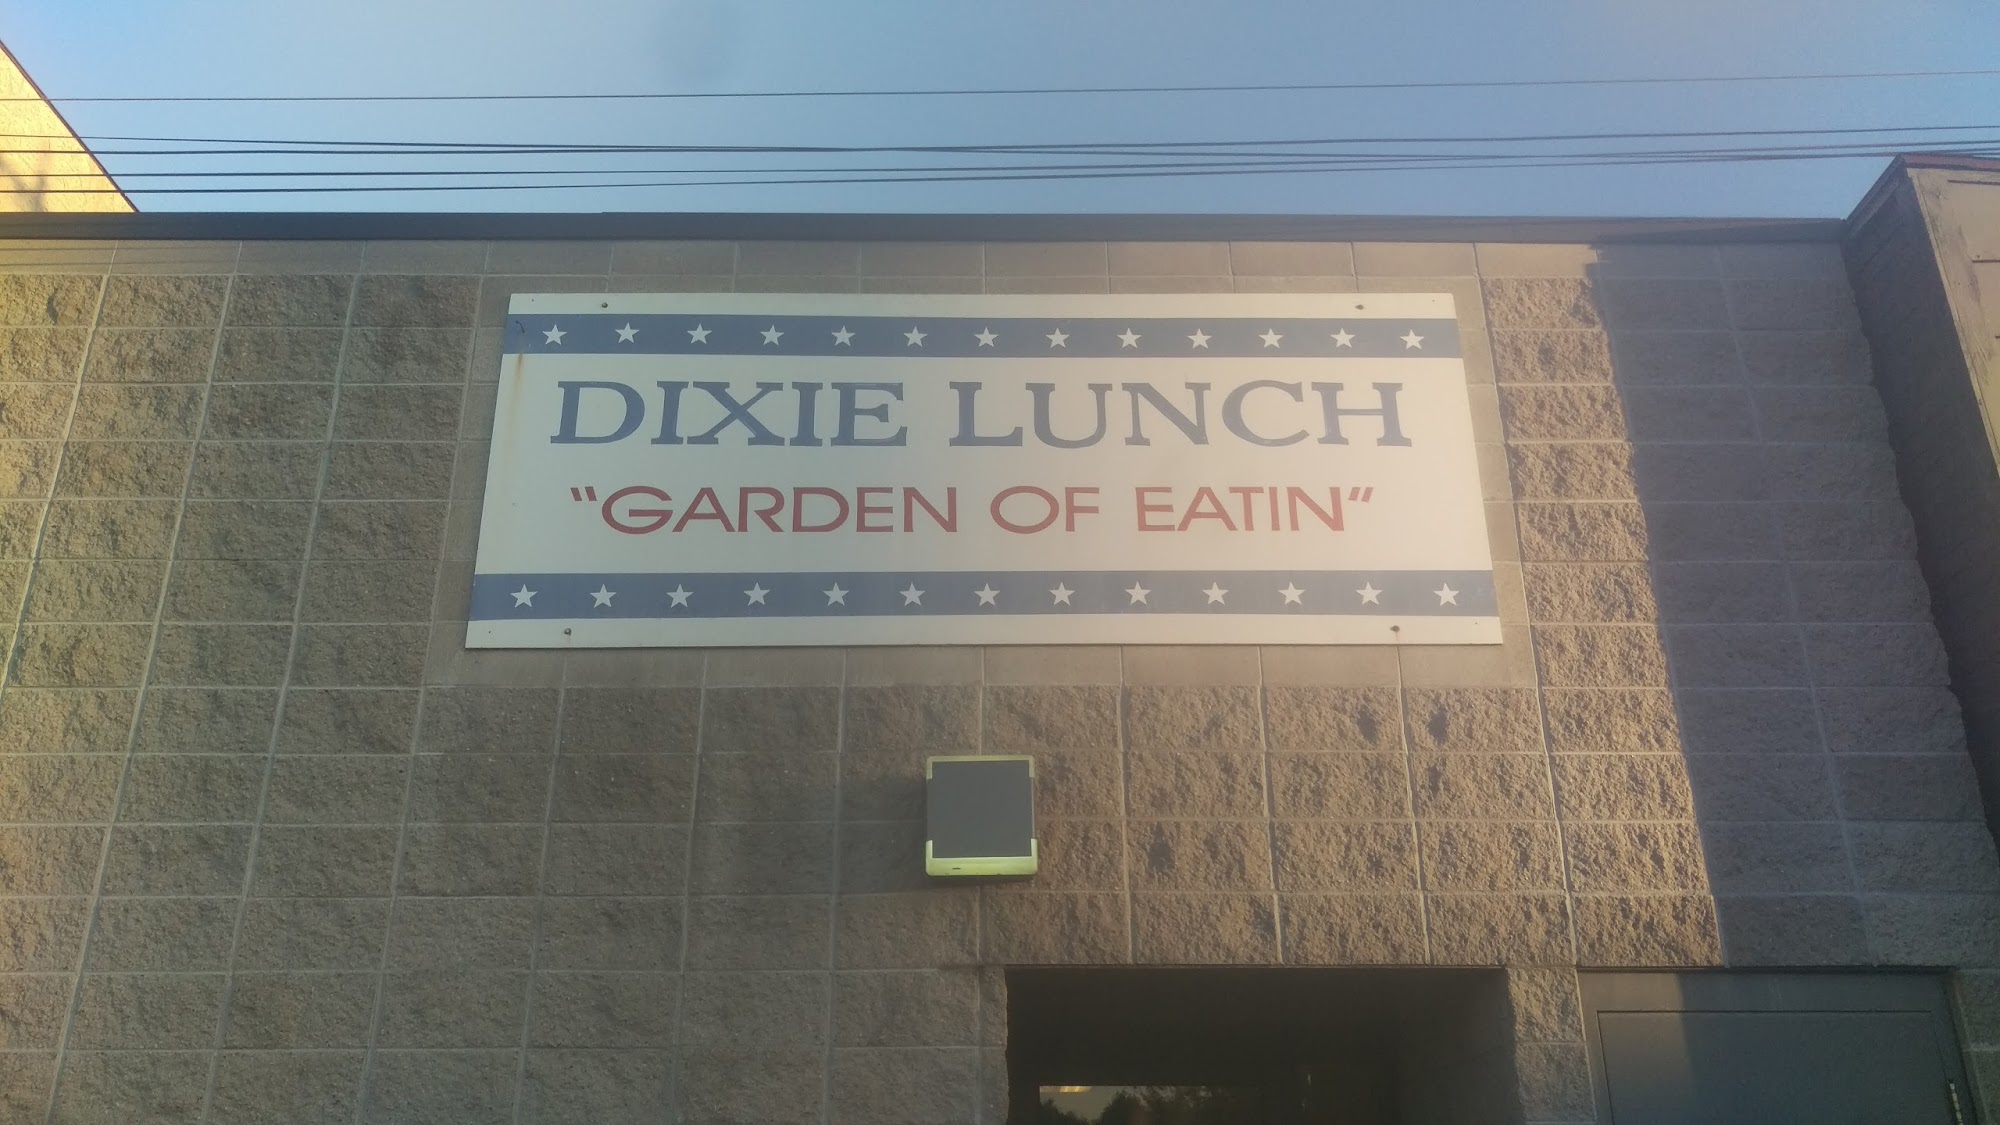 Dixie Lunch